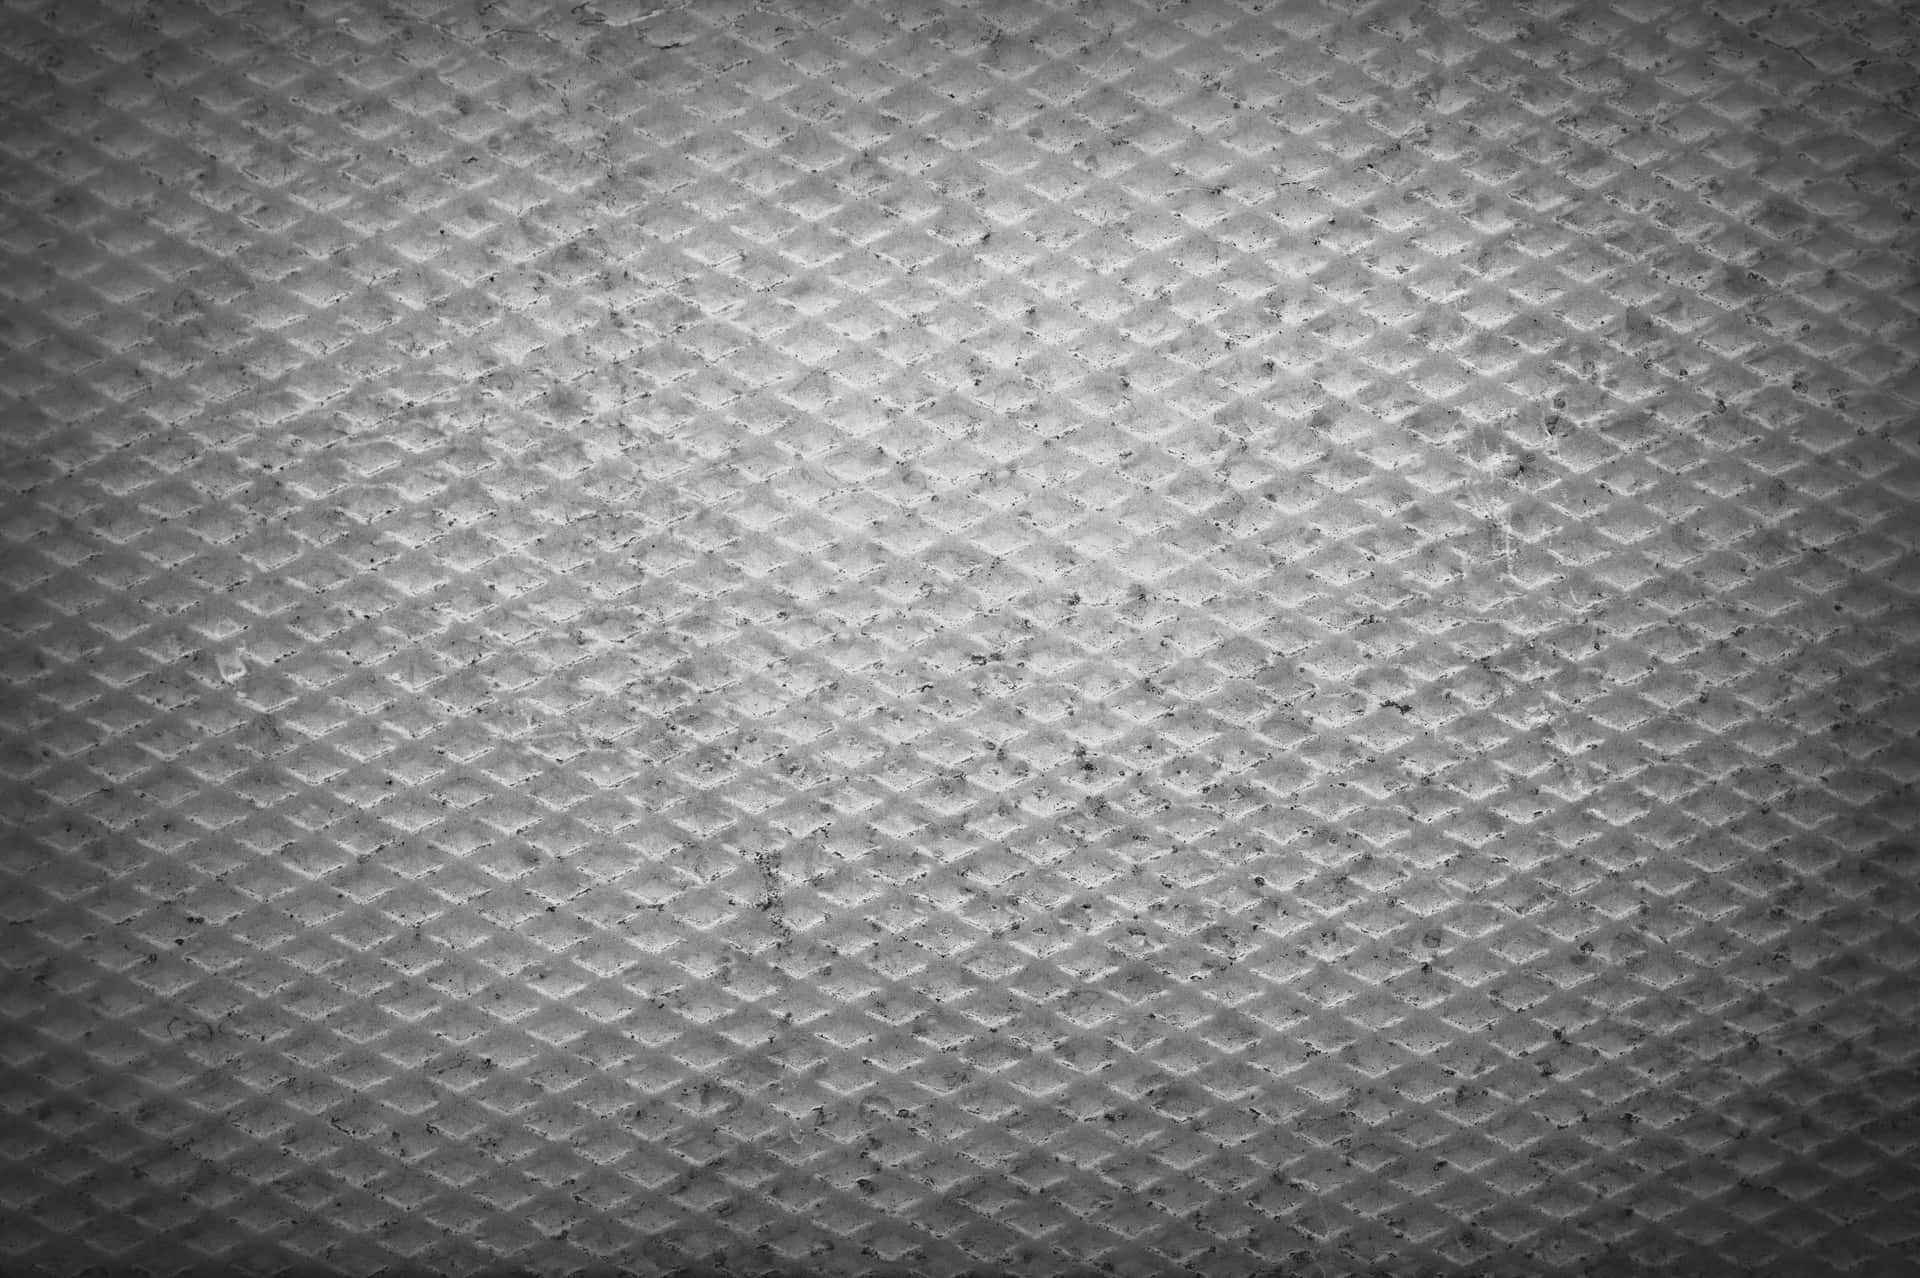 "Textured Gray Abstract Background"